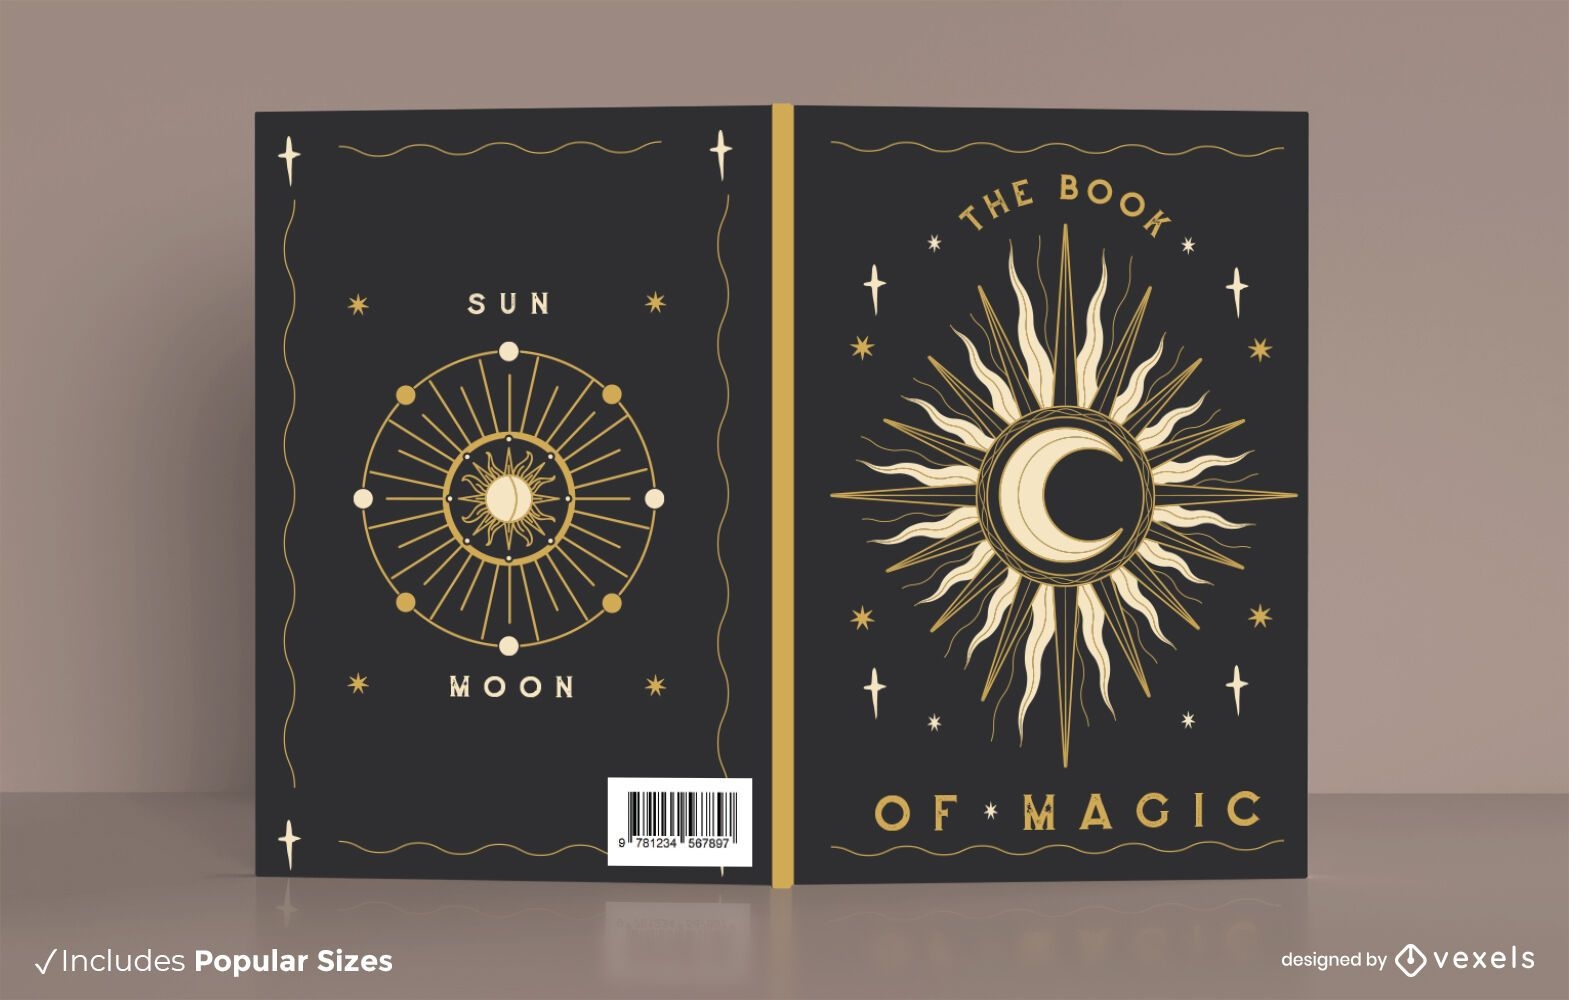 Sun and moon book cover design